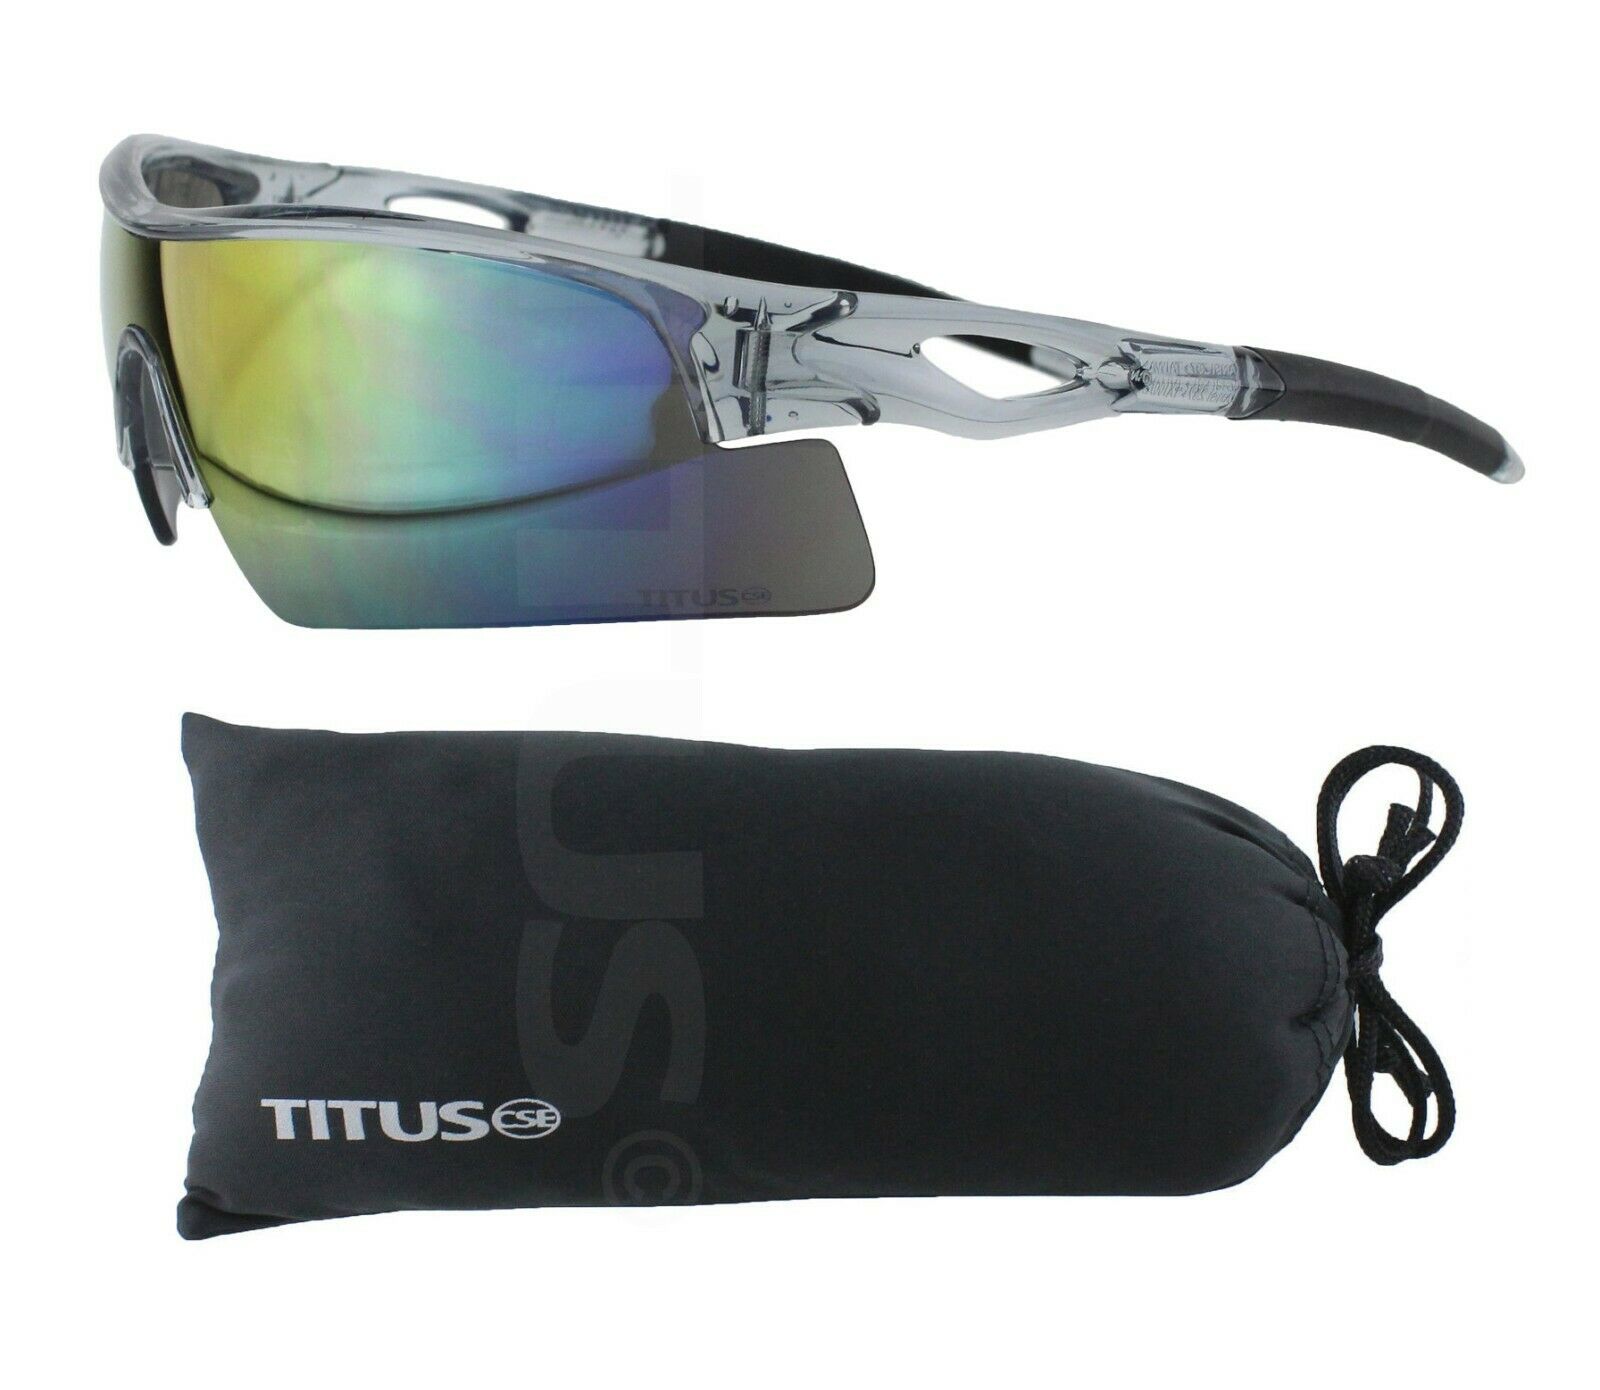 Titus G20 All-sport One Piece Blade Style Safety Glasses Eye Protection Ansi Z87